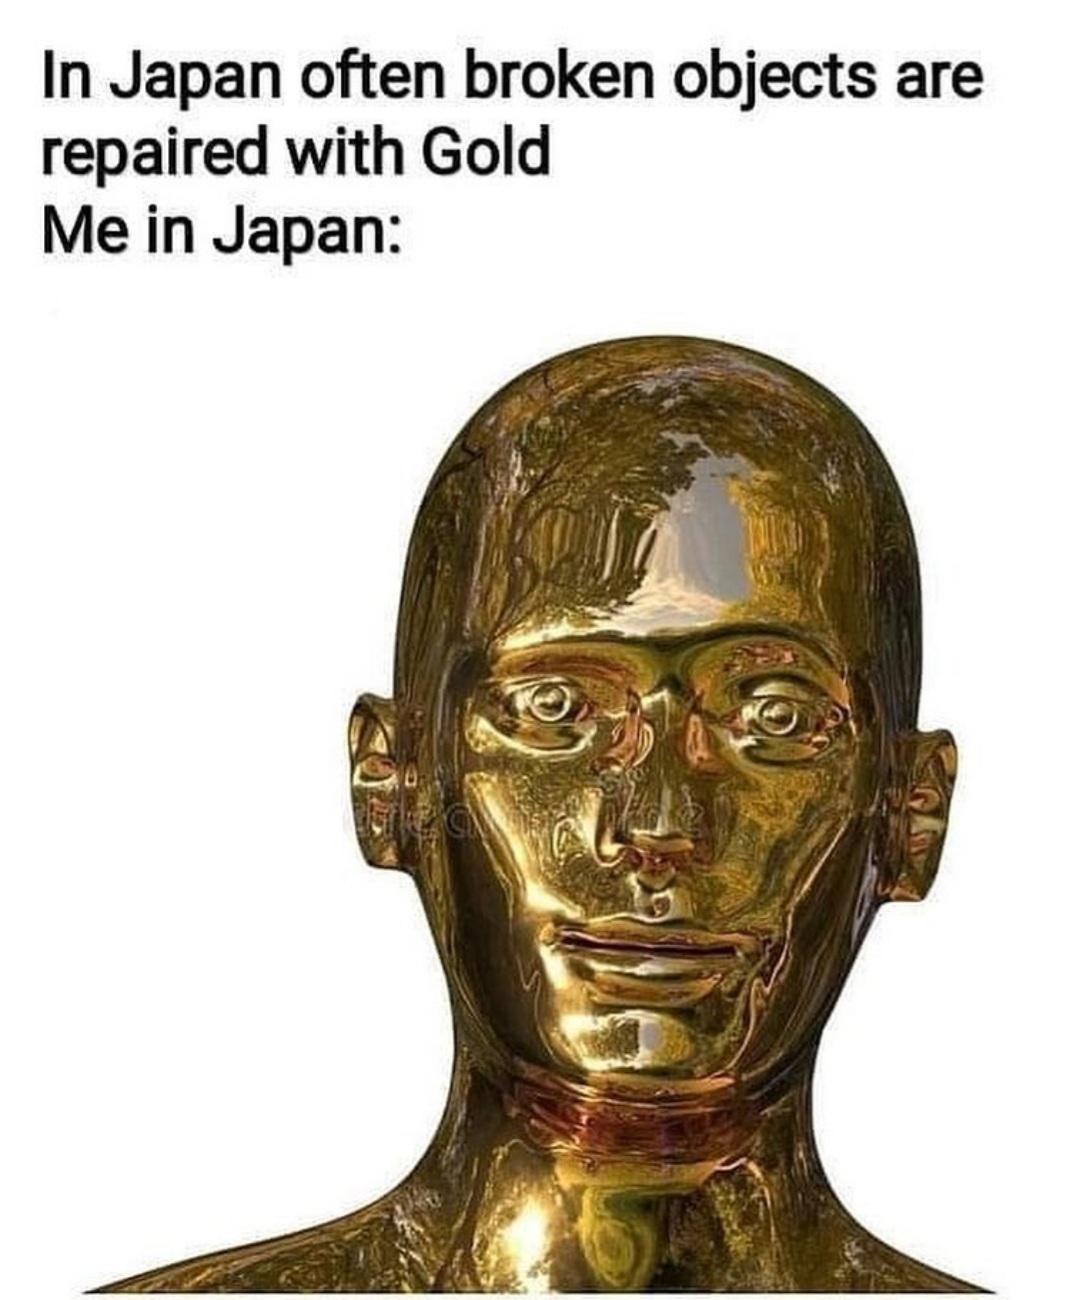 japan gold meme - In Japan often broken objects are repaired with Gold Me in Japan